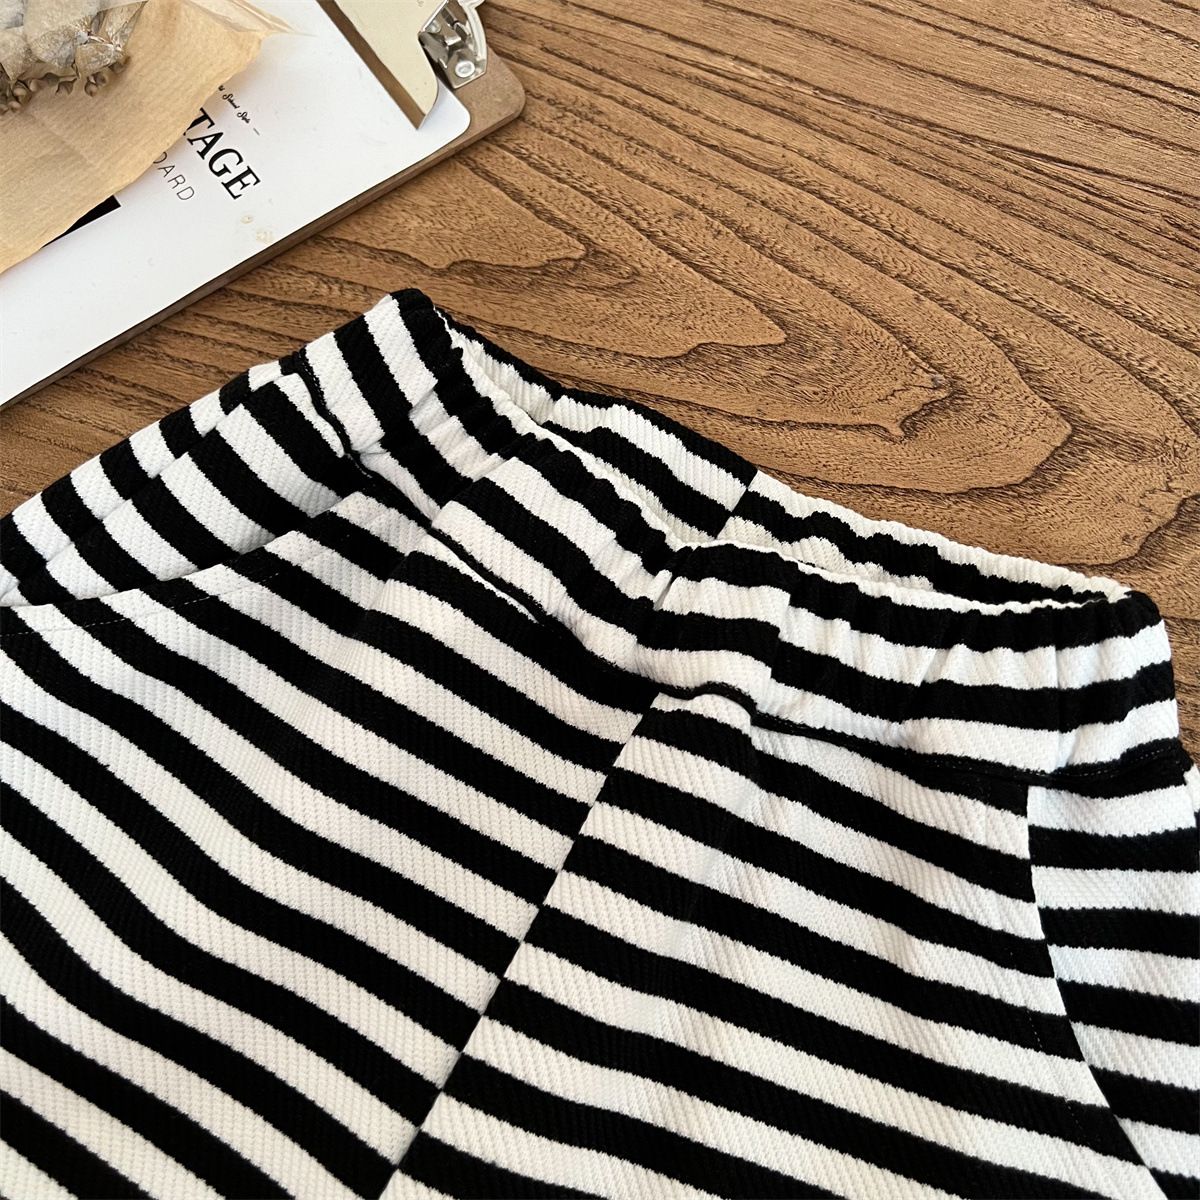 Boys summer cartoon bear short-sleeved shorts suit 2023 summer new children's striped POLO collar two-piece suit